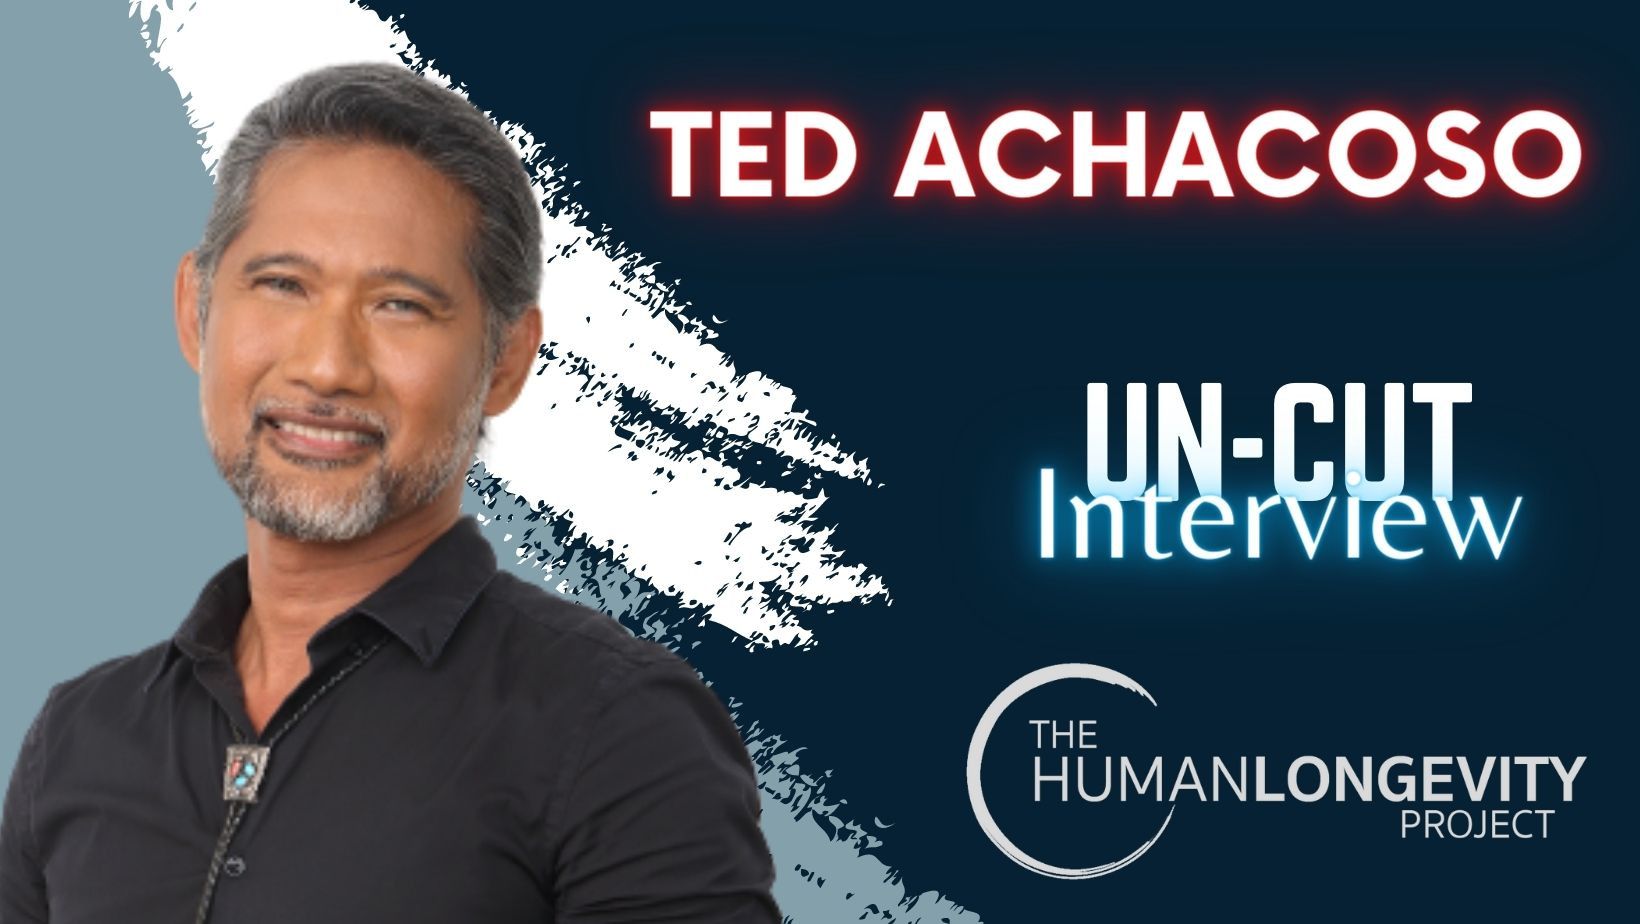 Human Longevity Project Uncut Interview With Dr. Ted Achacoso